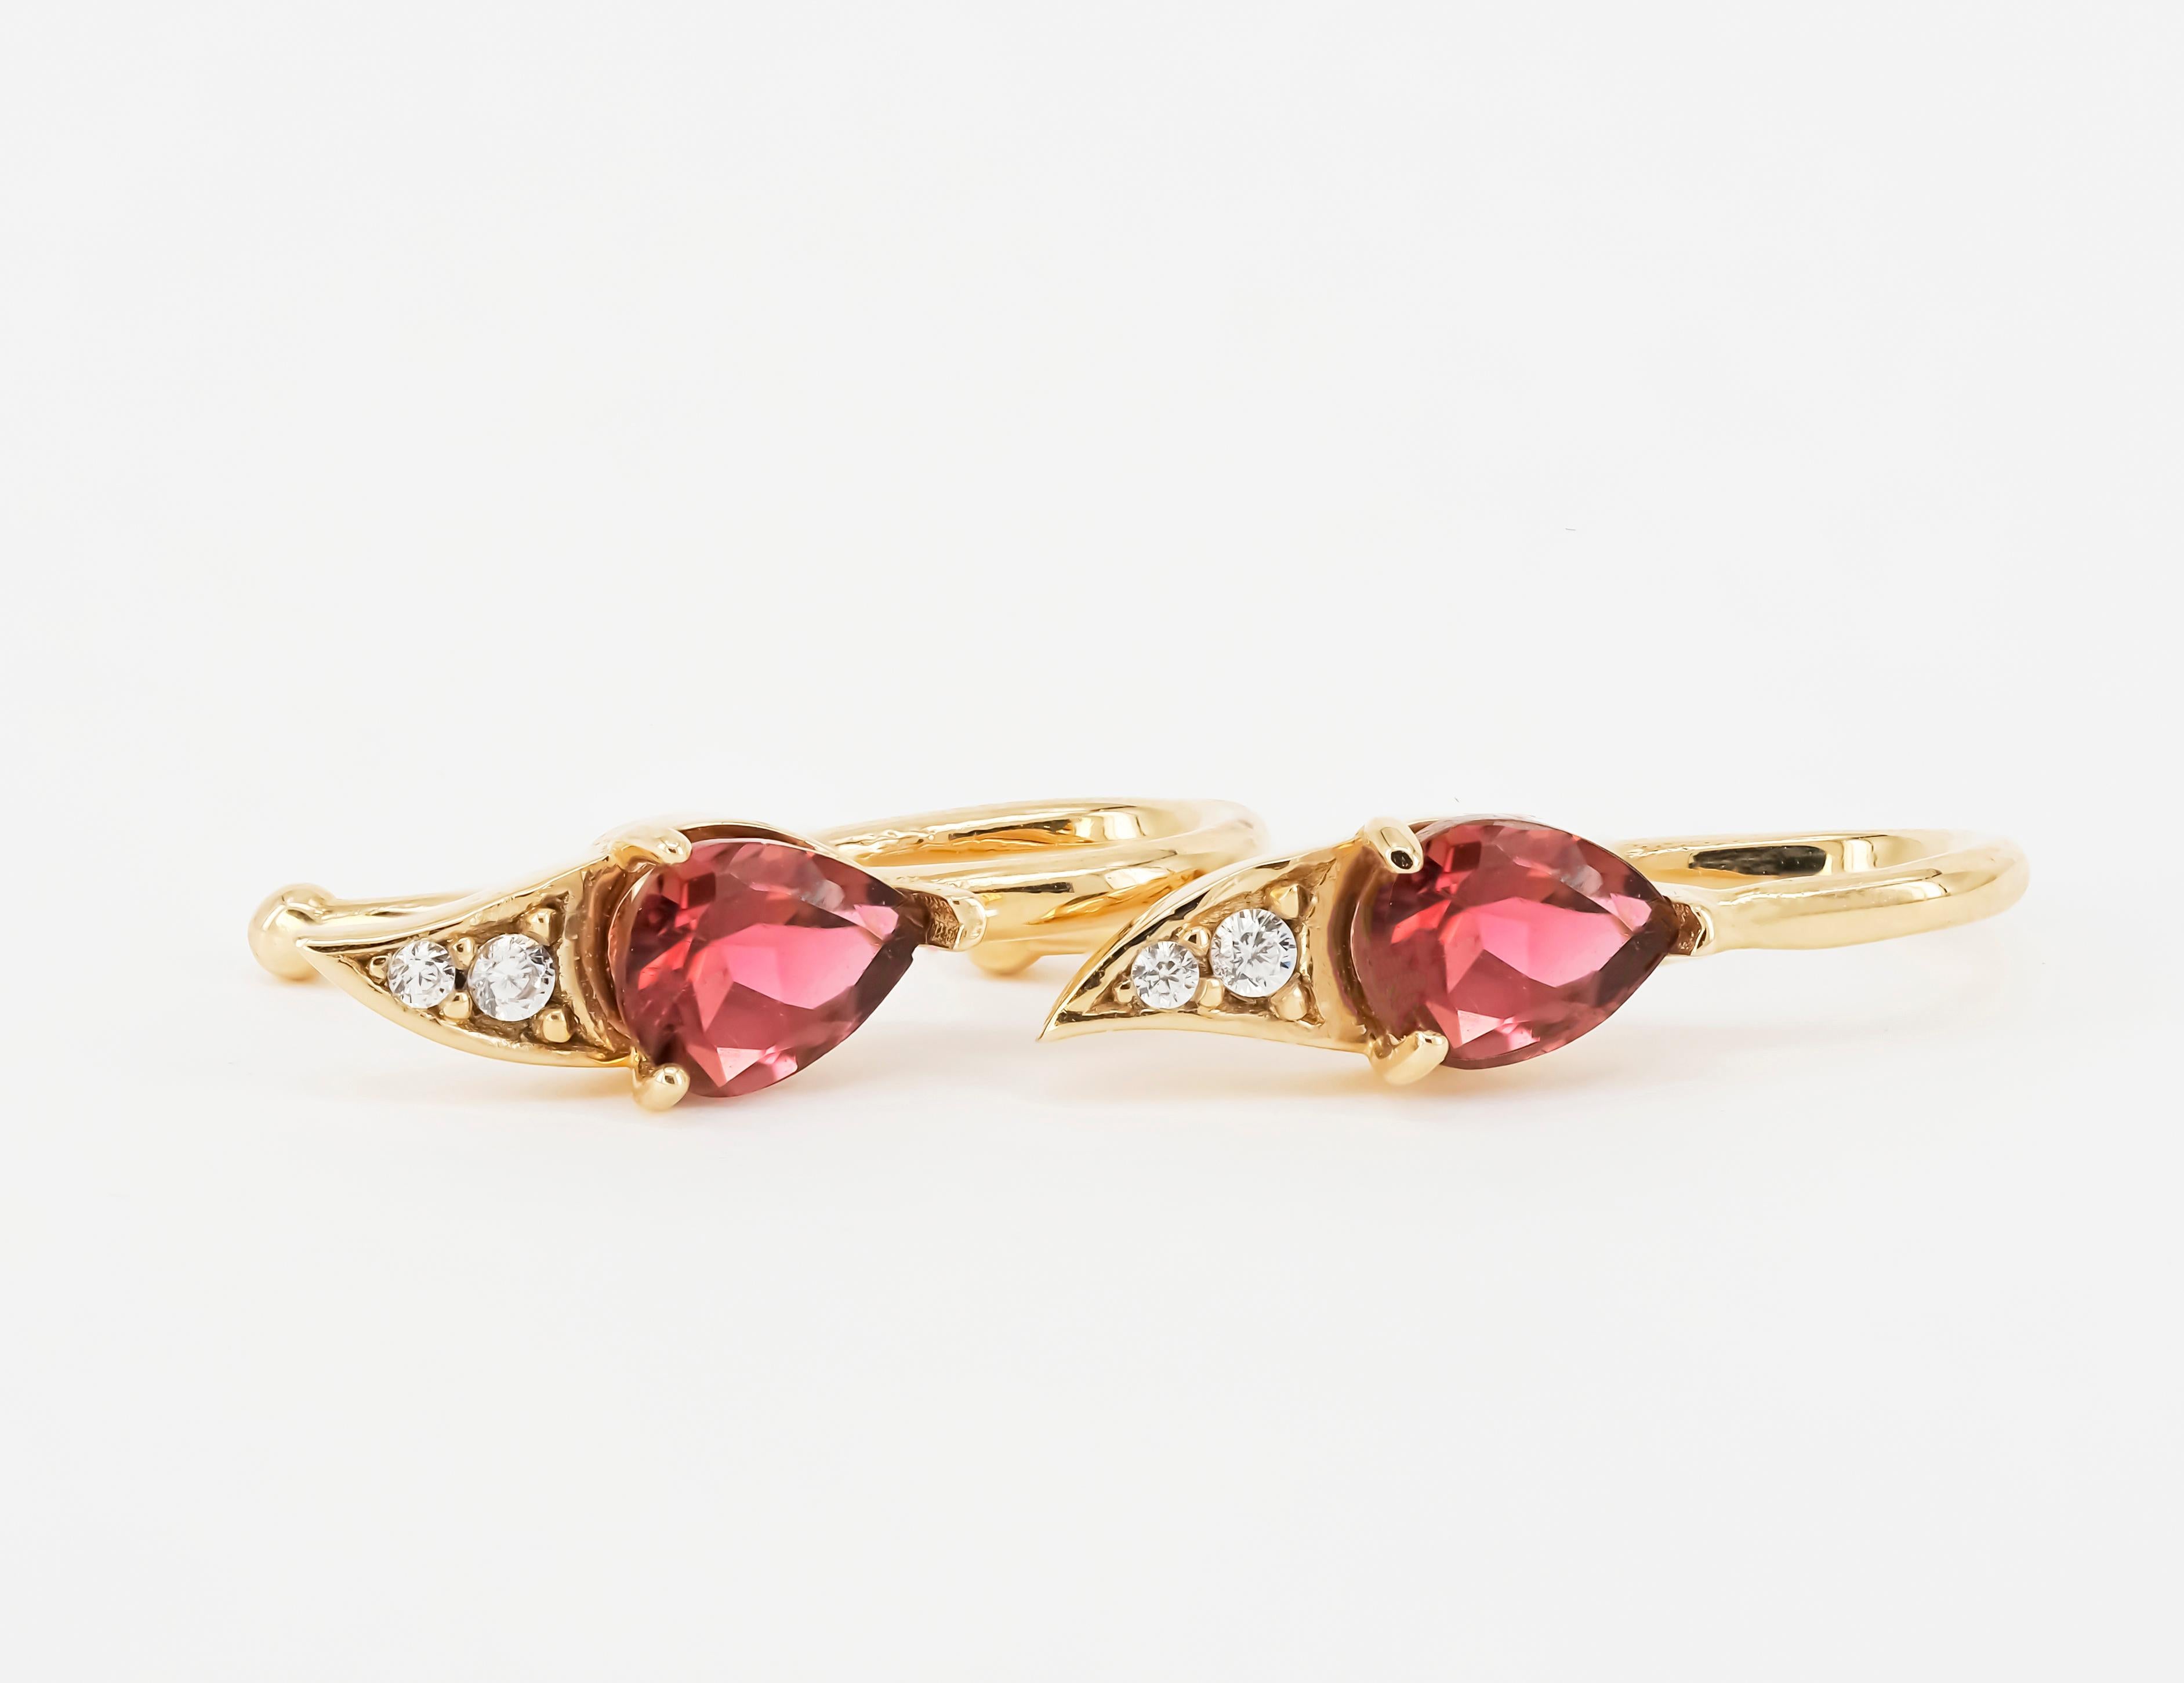 Pink Tourmaline Earrings in 14k Yellow Gold For Sale 1